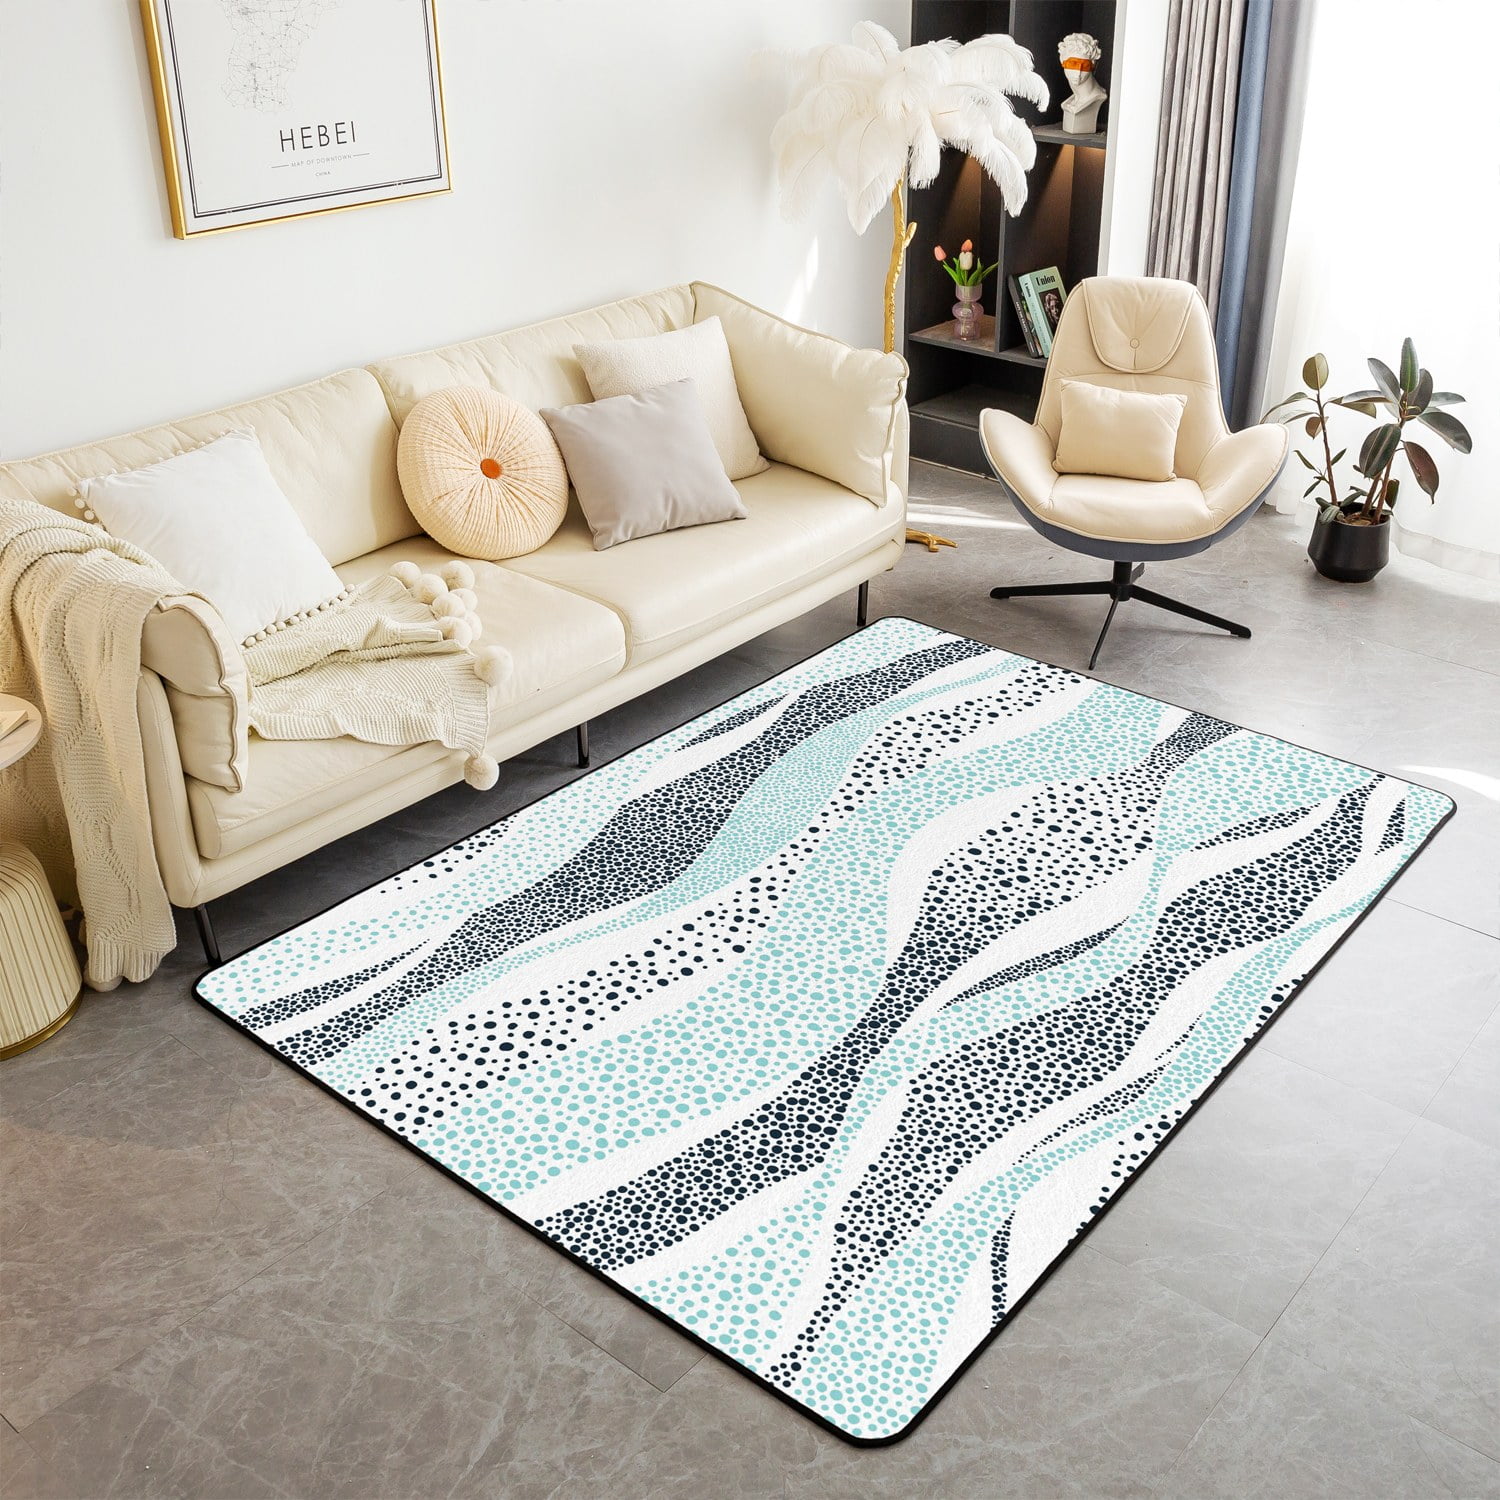 Ocean Wave Area Rugs 3x5 for Bedside, Abstract Living Room Rugs, Teal ...